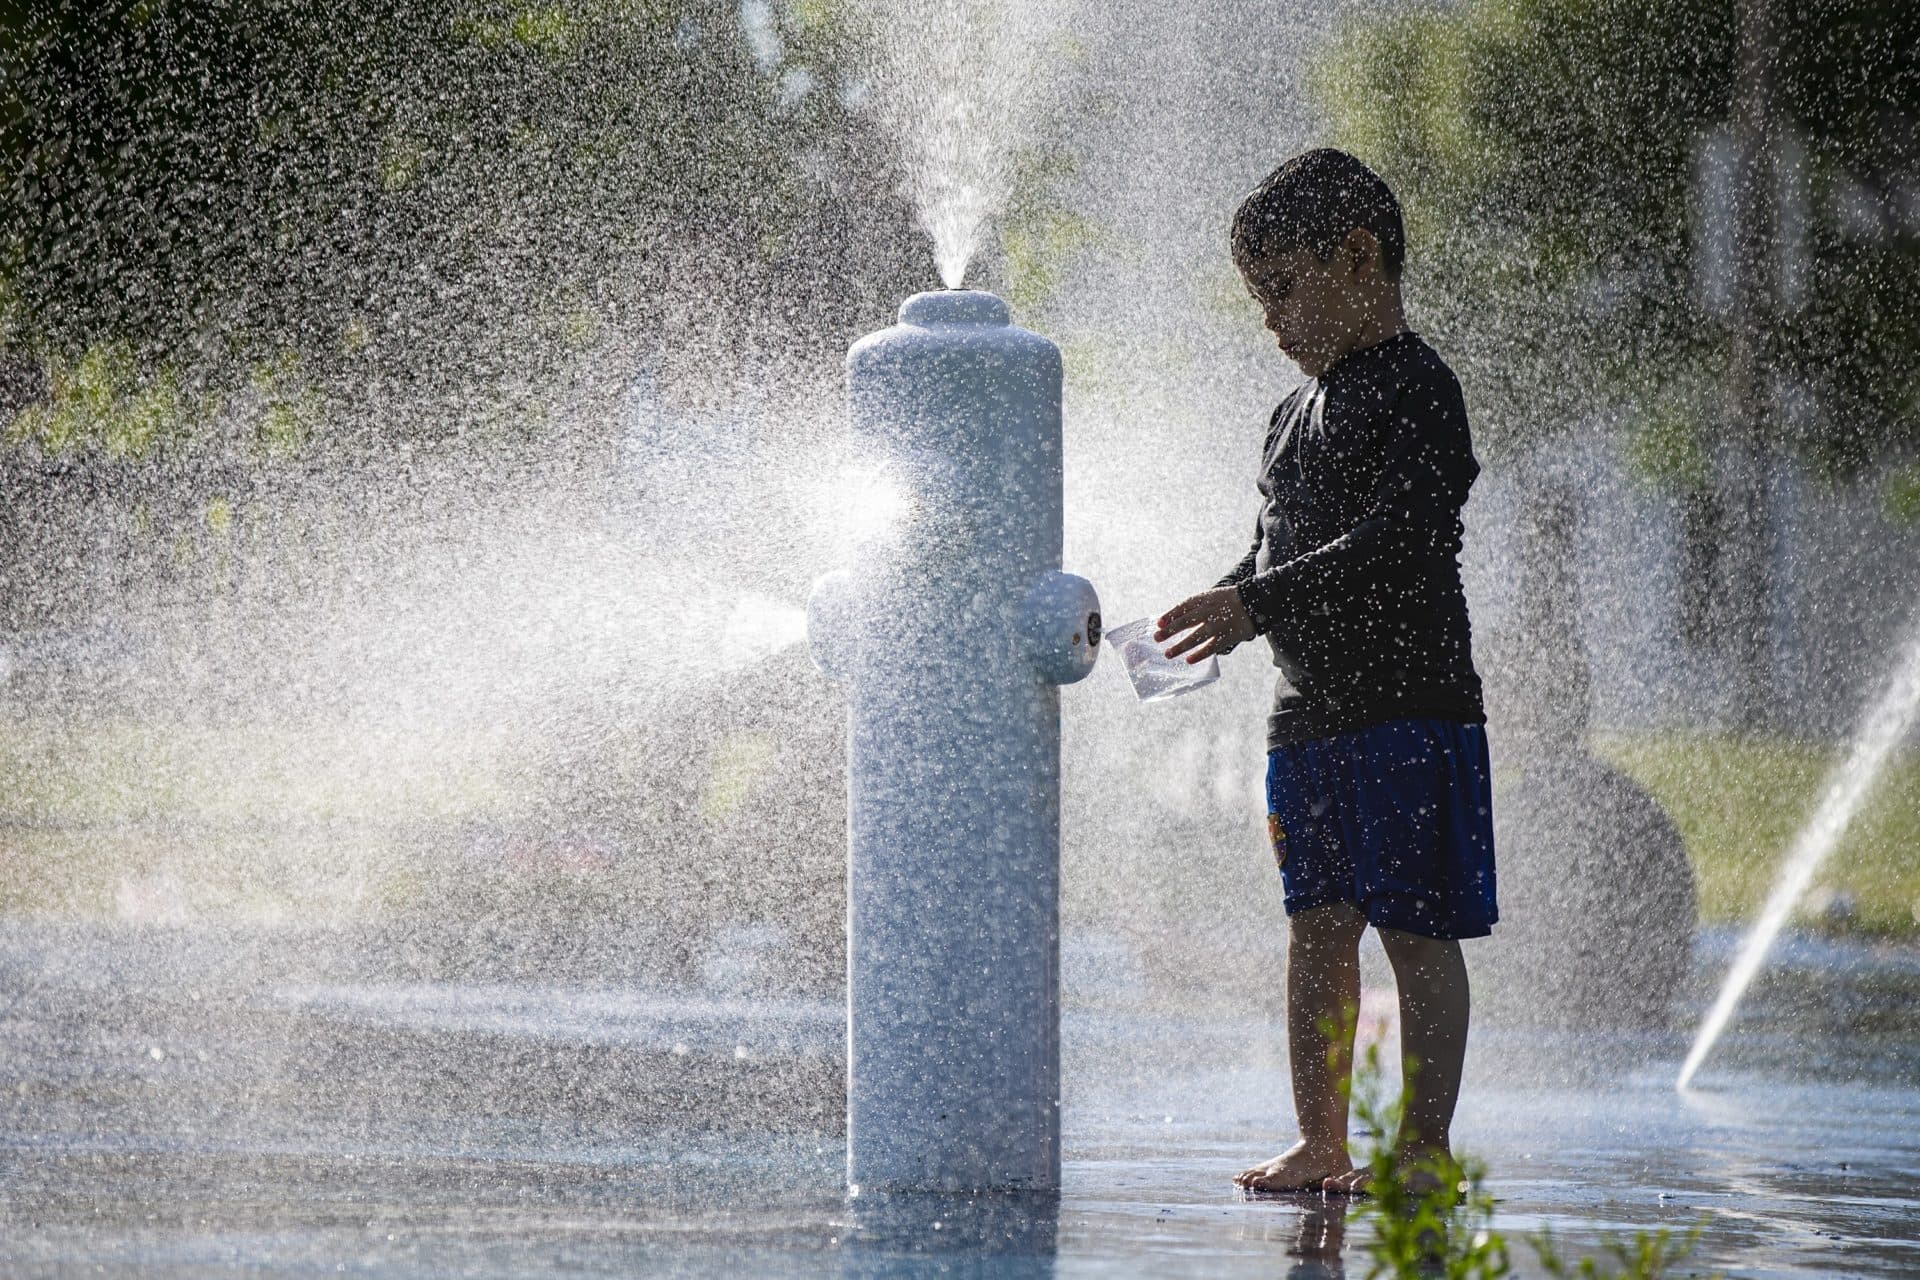 During the hot day, families attending the rally kept cool in the spray pad at Ronan Park. (Jesse Costa/WBUR)